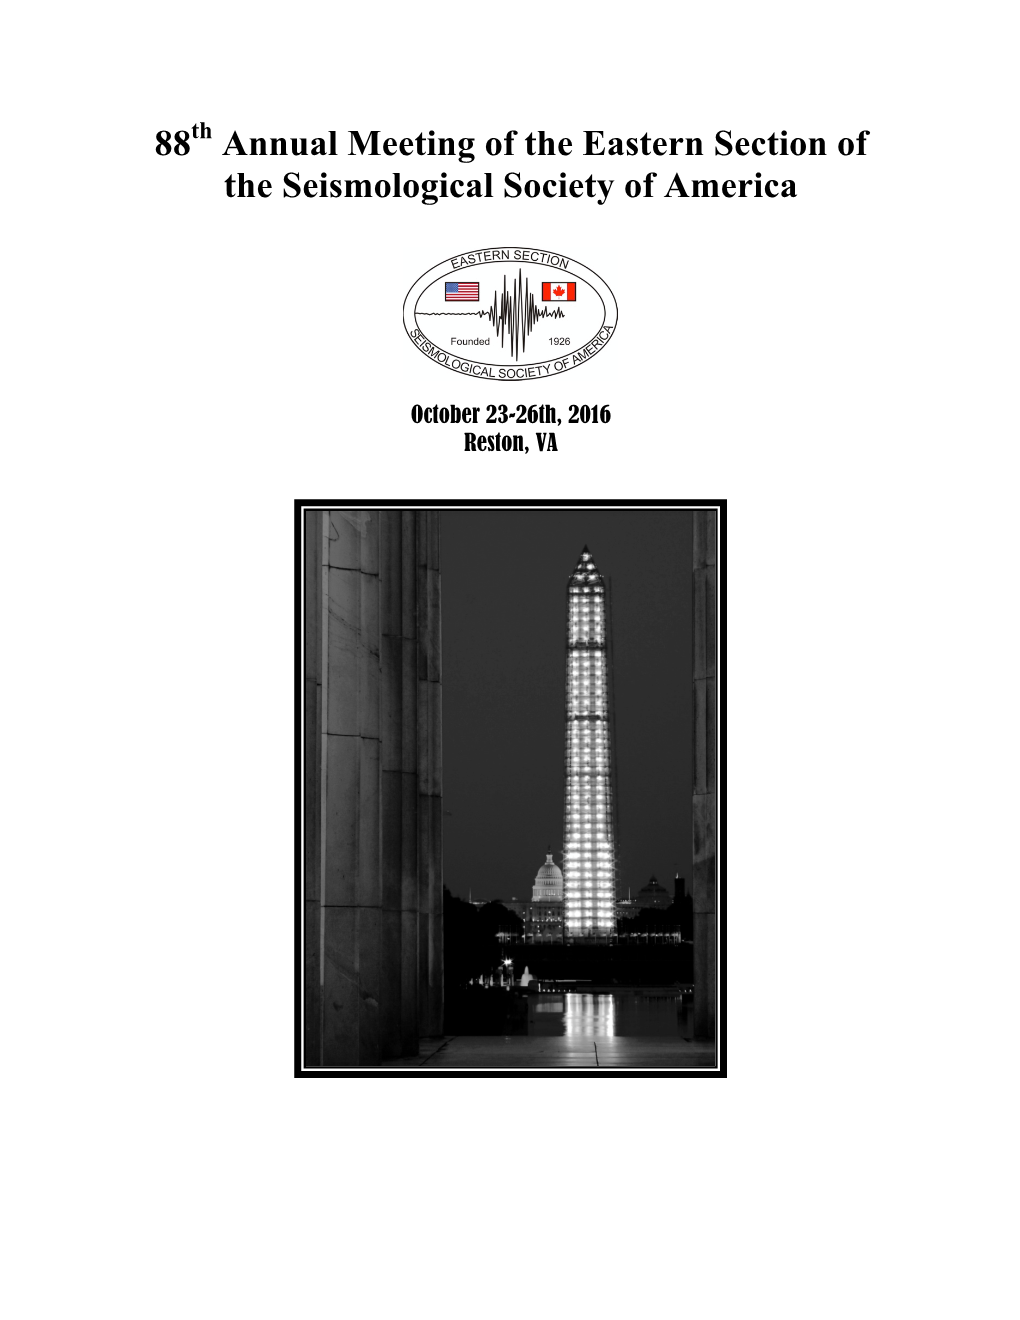 88 Annual Meeting of the Eastern Section of the Seismological